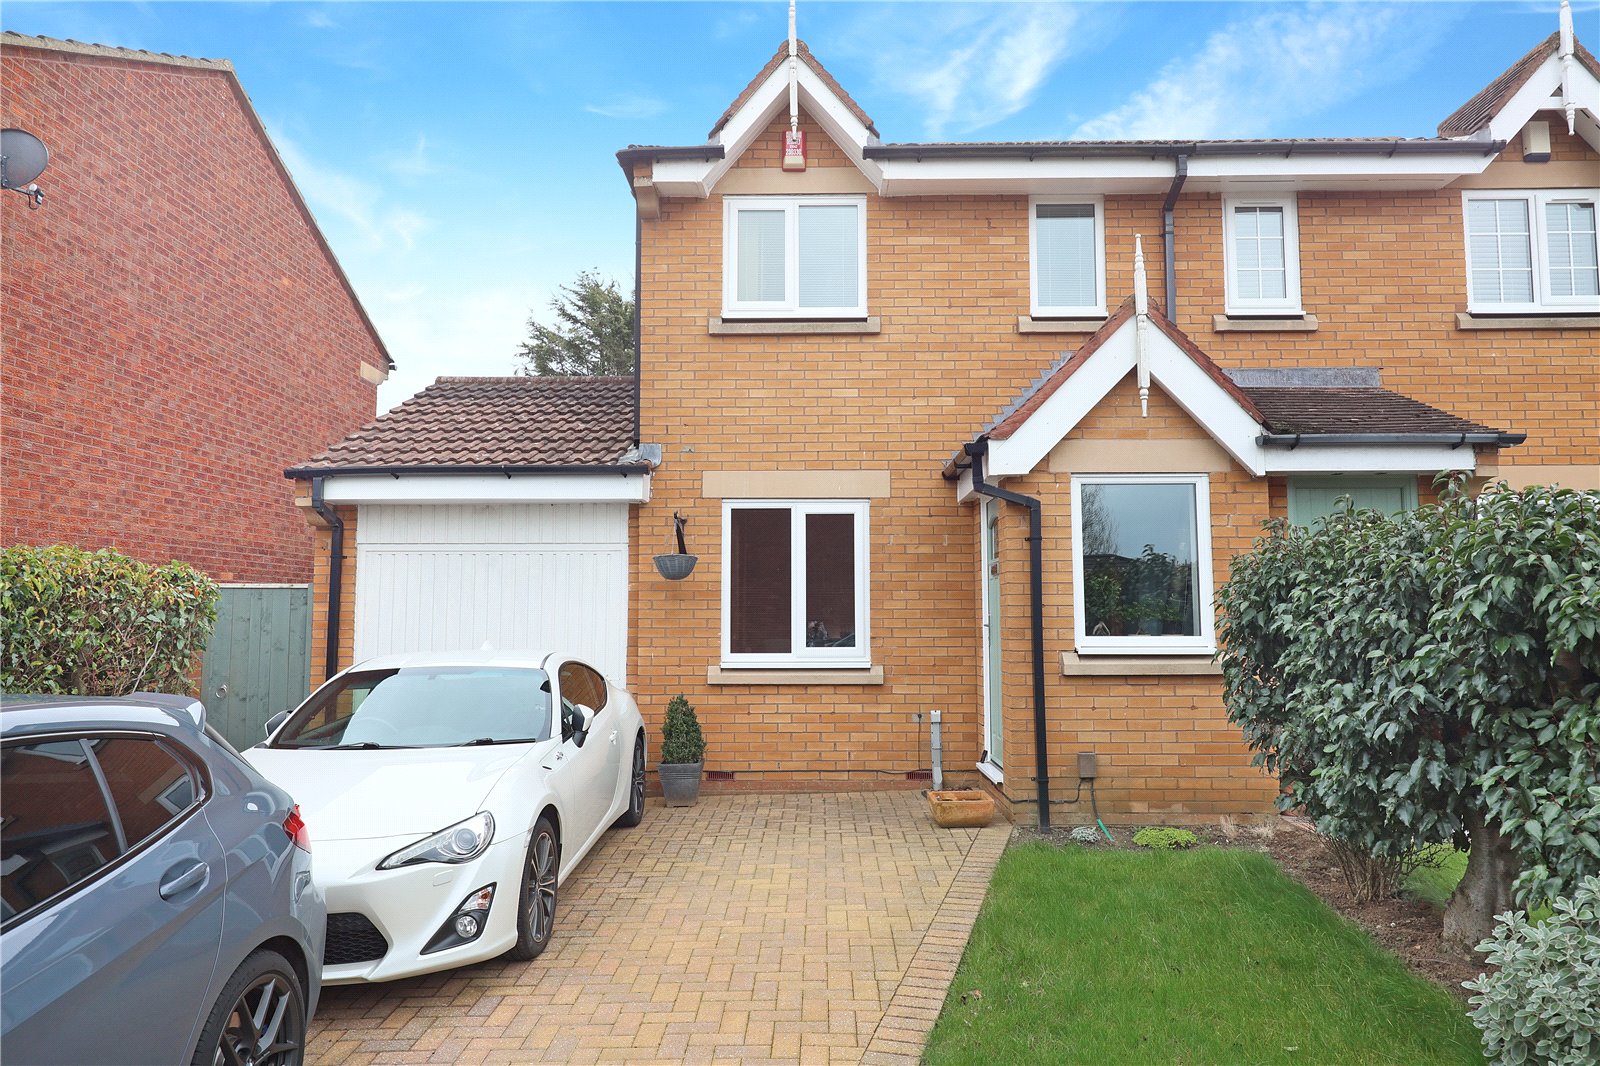 2 bed house for sale in Woodrush, Coulby Newham 1